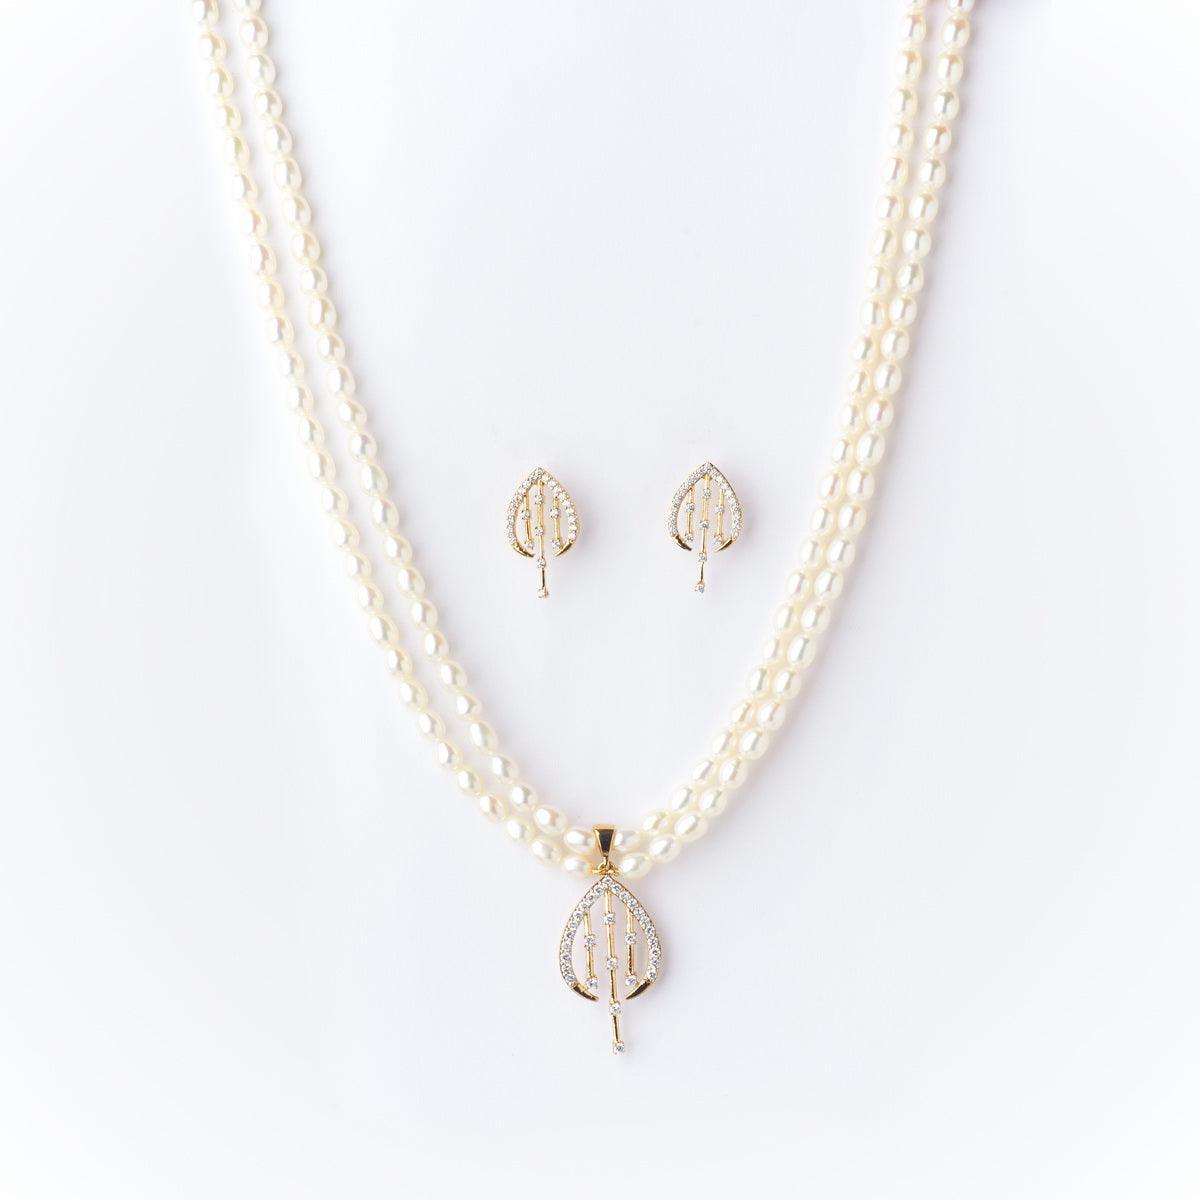 Vintage Real Pearl Necklace Set - Chandrani Pearls